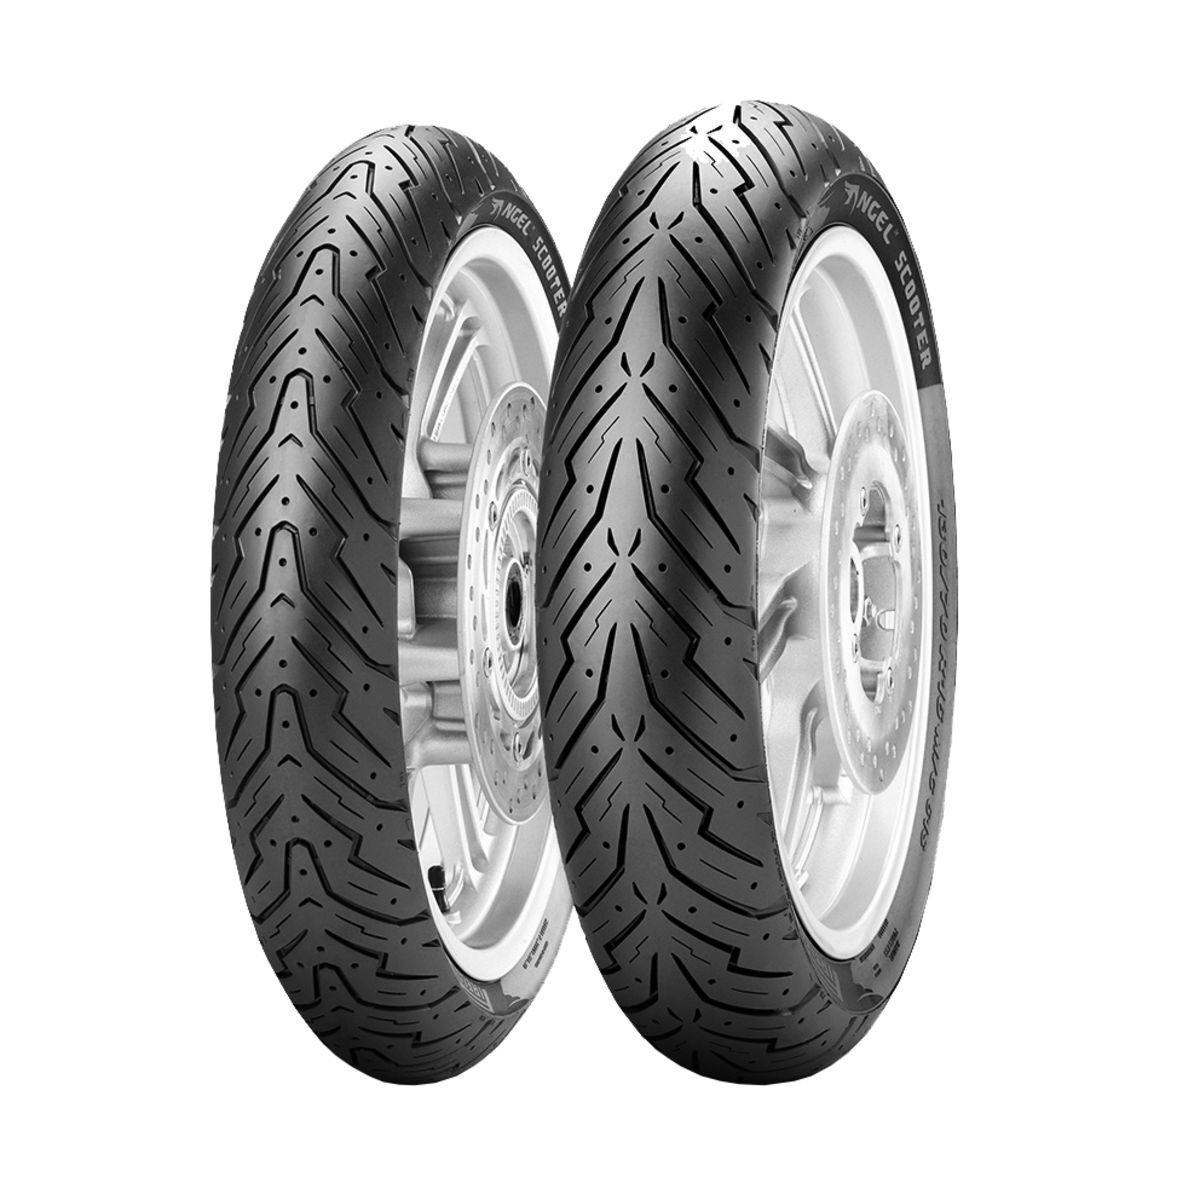 Pirelli Pneumatico scooter ANGEL SCOOTER 120/70-11 TL 56L